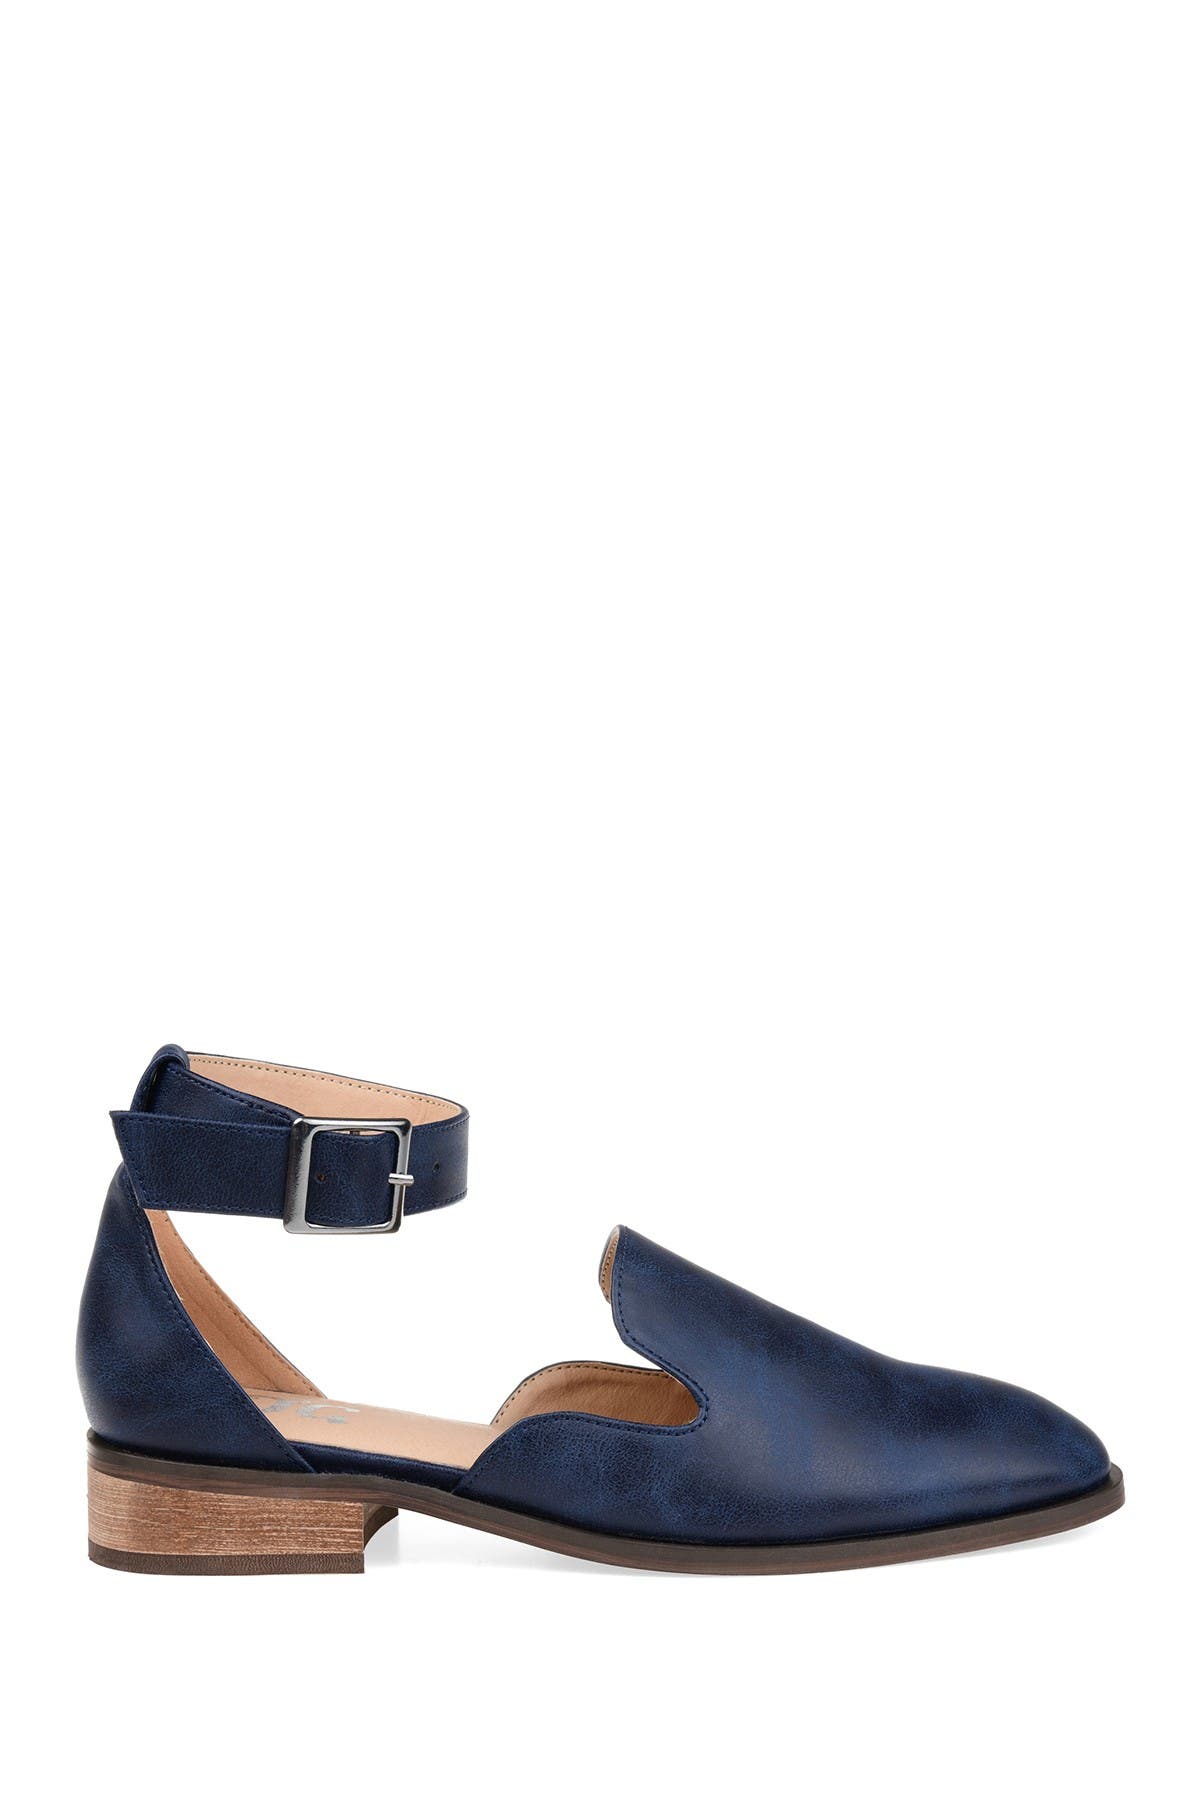 Journee Collection Loreta Ankle Buckle Flat In Navy2